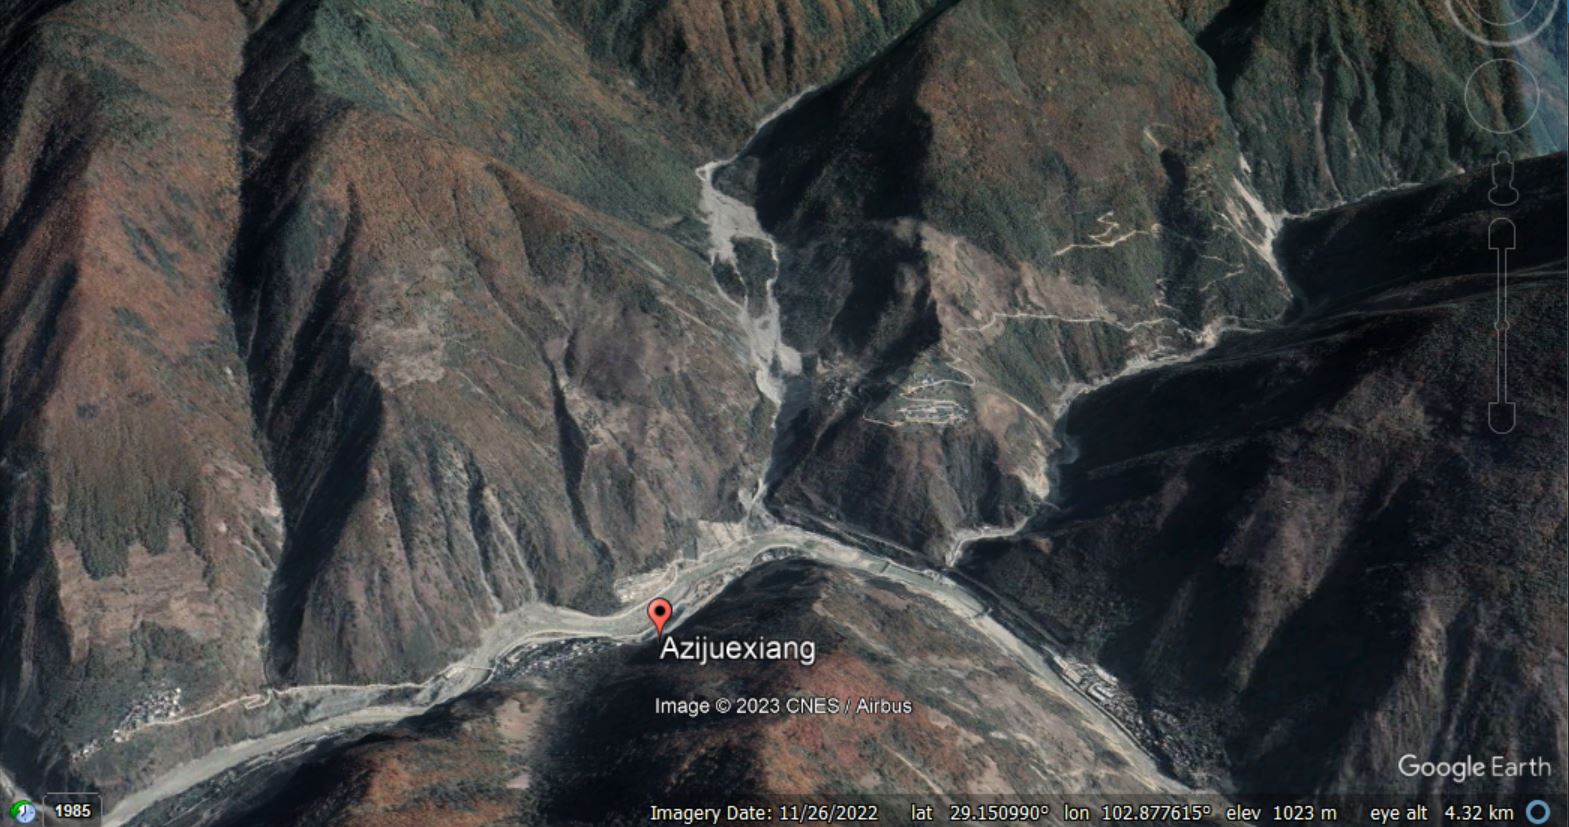 Google Earth image of the aftermath of the Azijue debris flow, collected in November 2022.